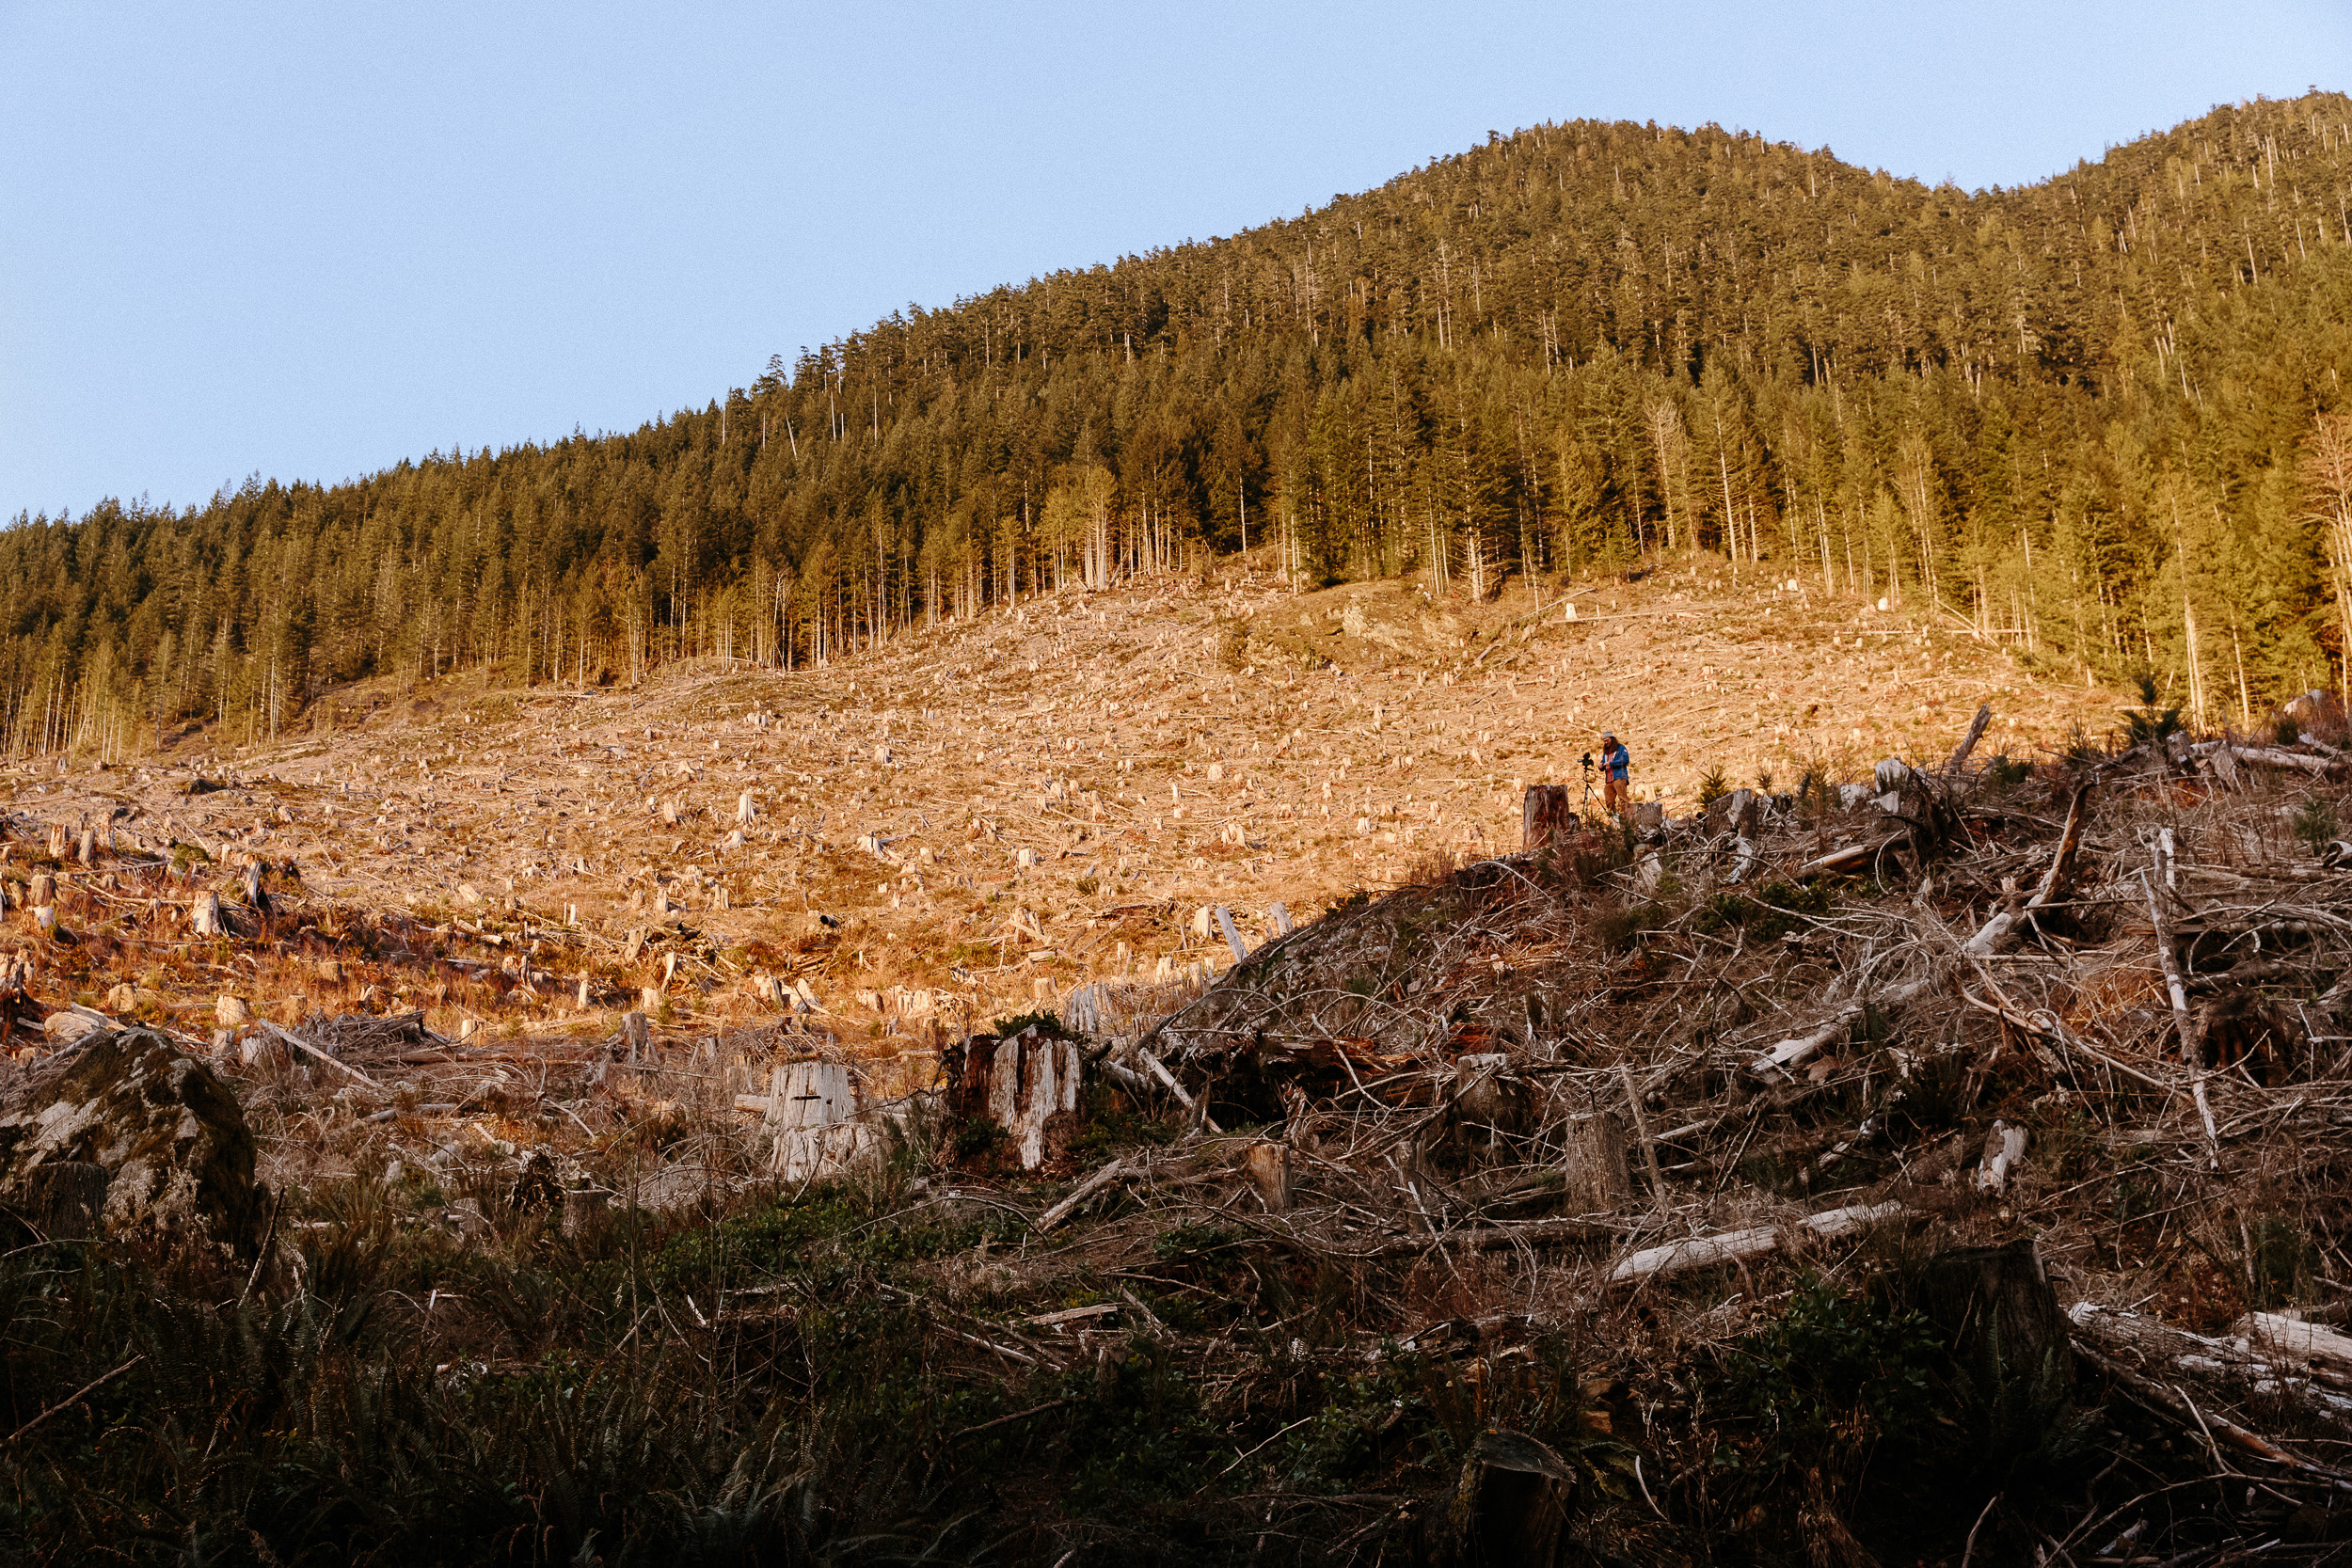 08-Vancouver-Island-BC-Carmanah-Walbran-Valley-Old-Growth-Forest-Clearcut-Logging-Devastation.jpg